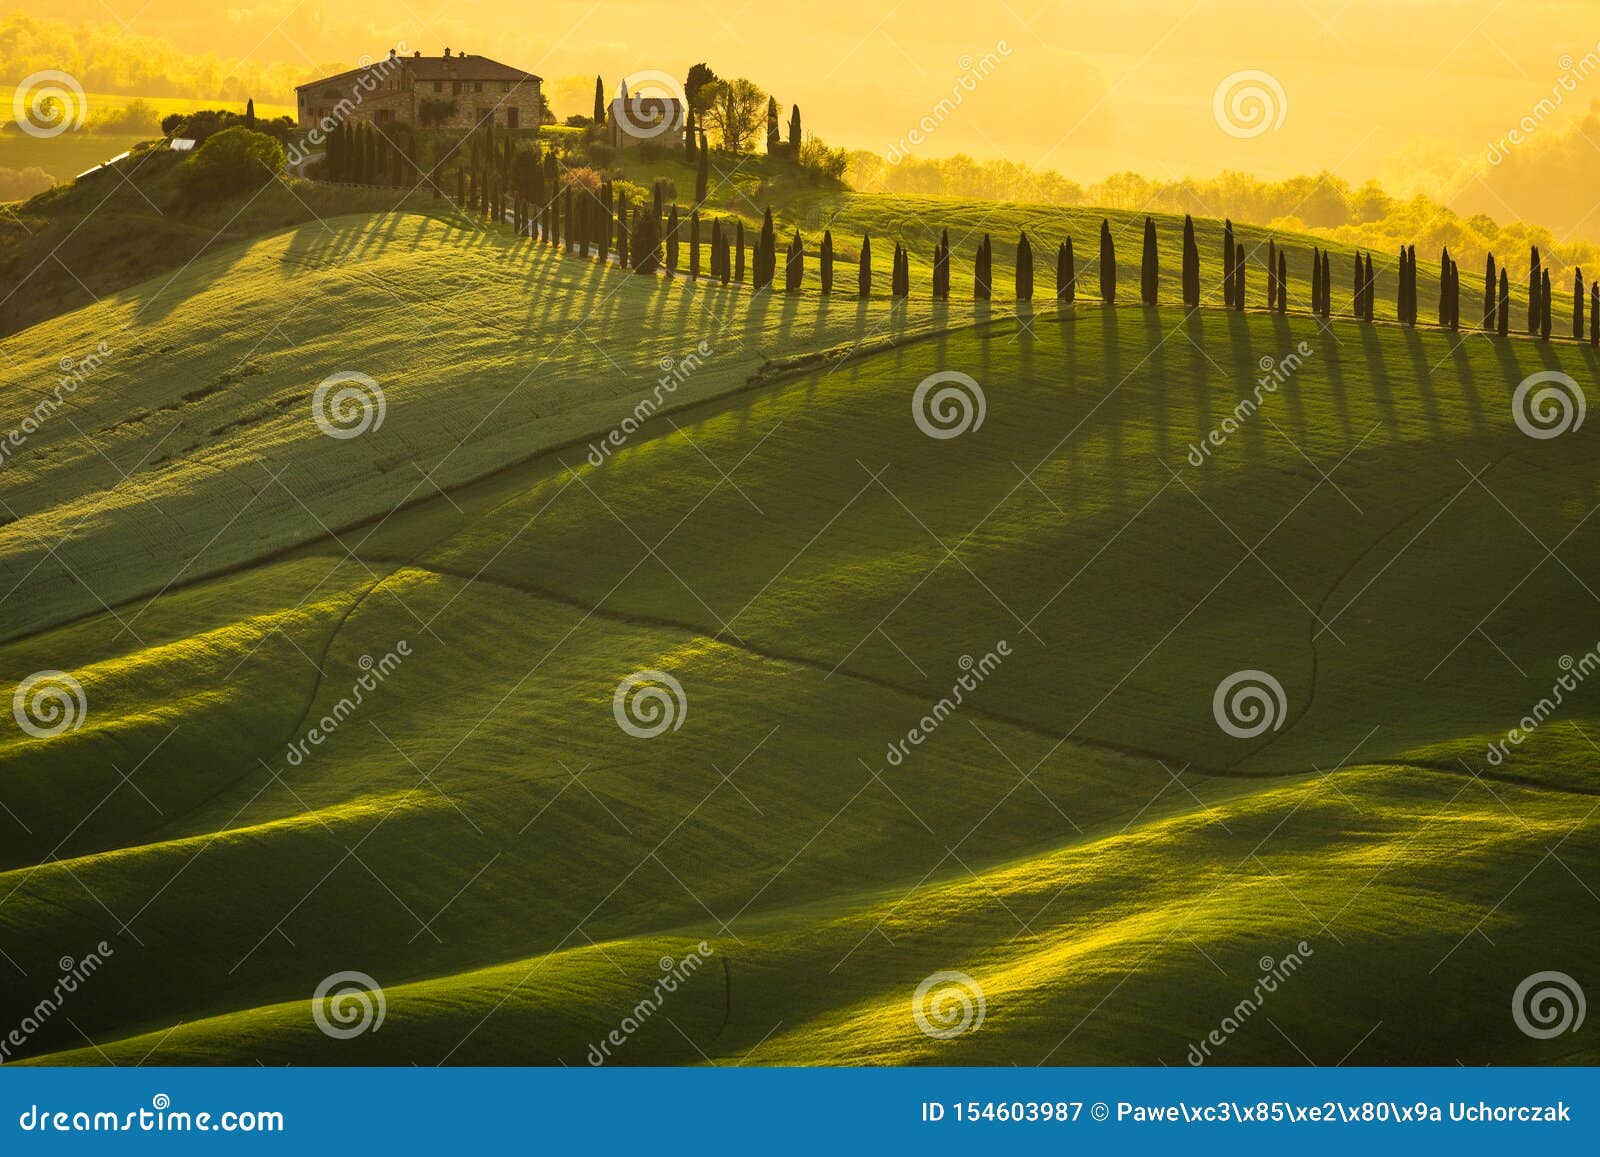 Impressive Spring Landscape,view with Cypresses and Vineyards ,Tuscany ...